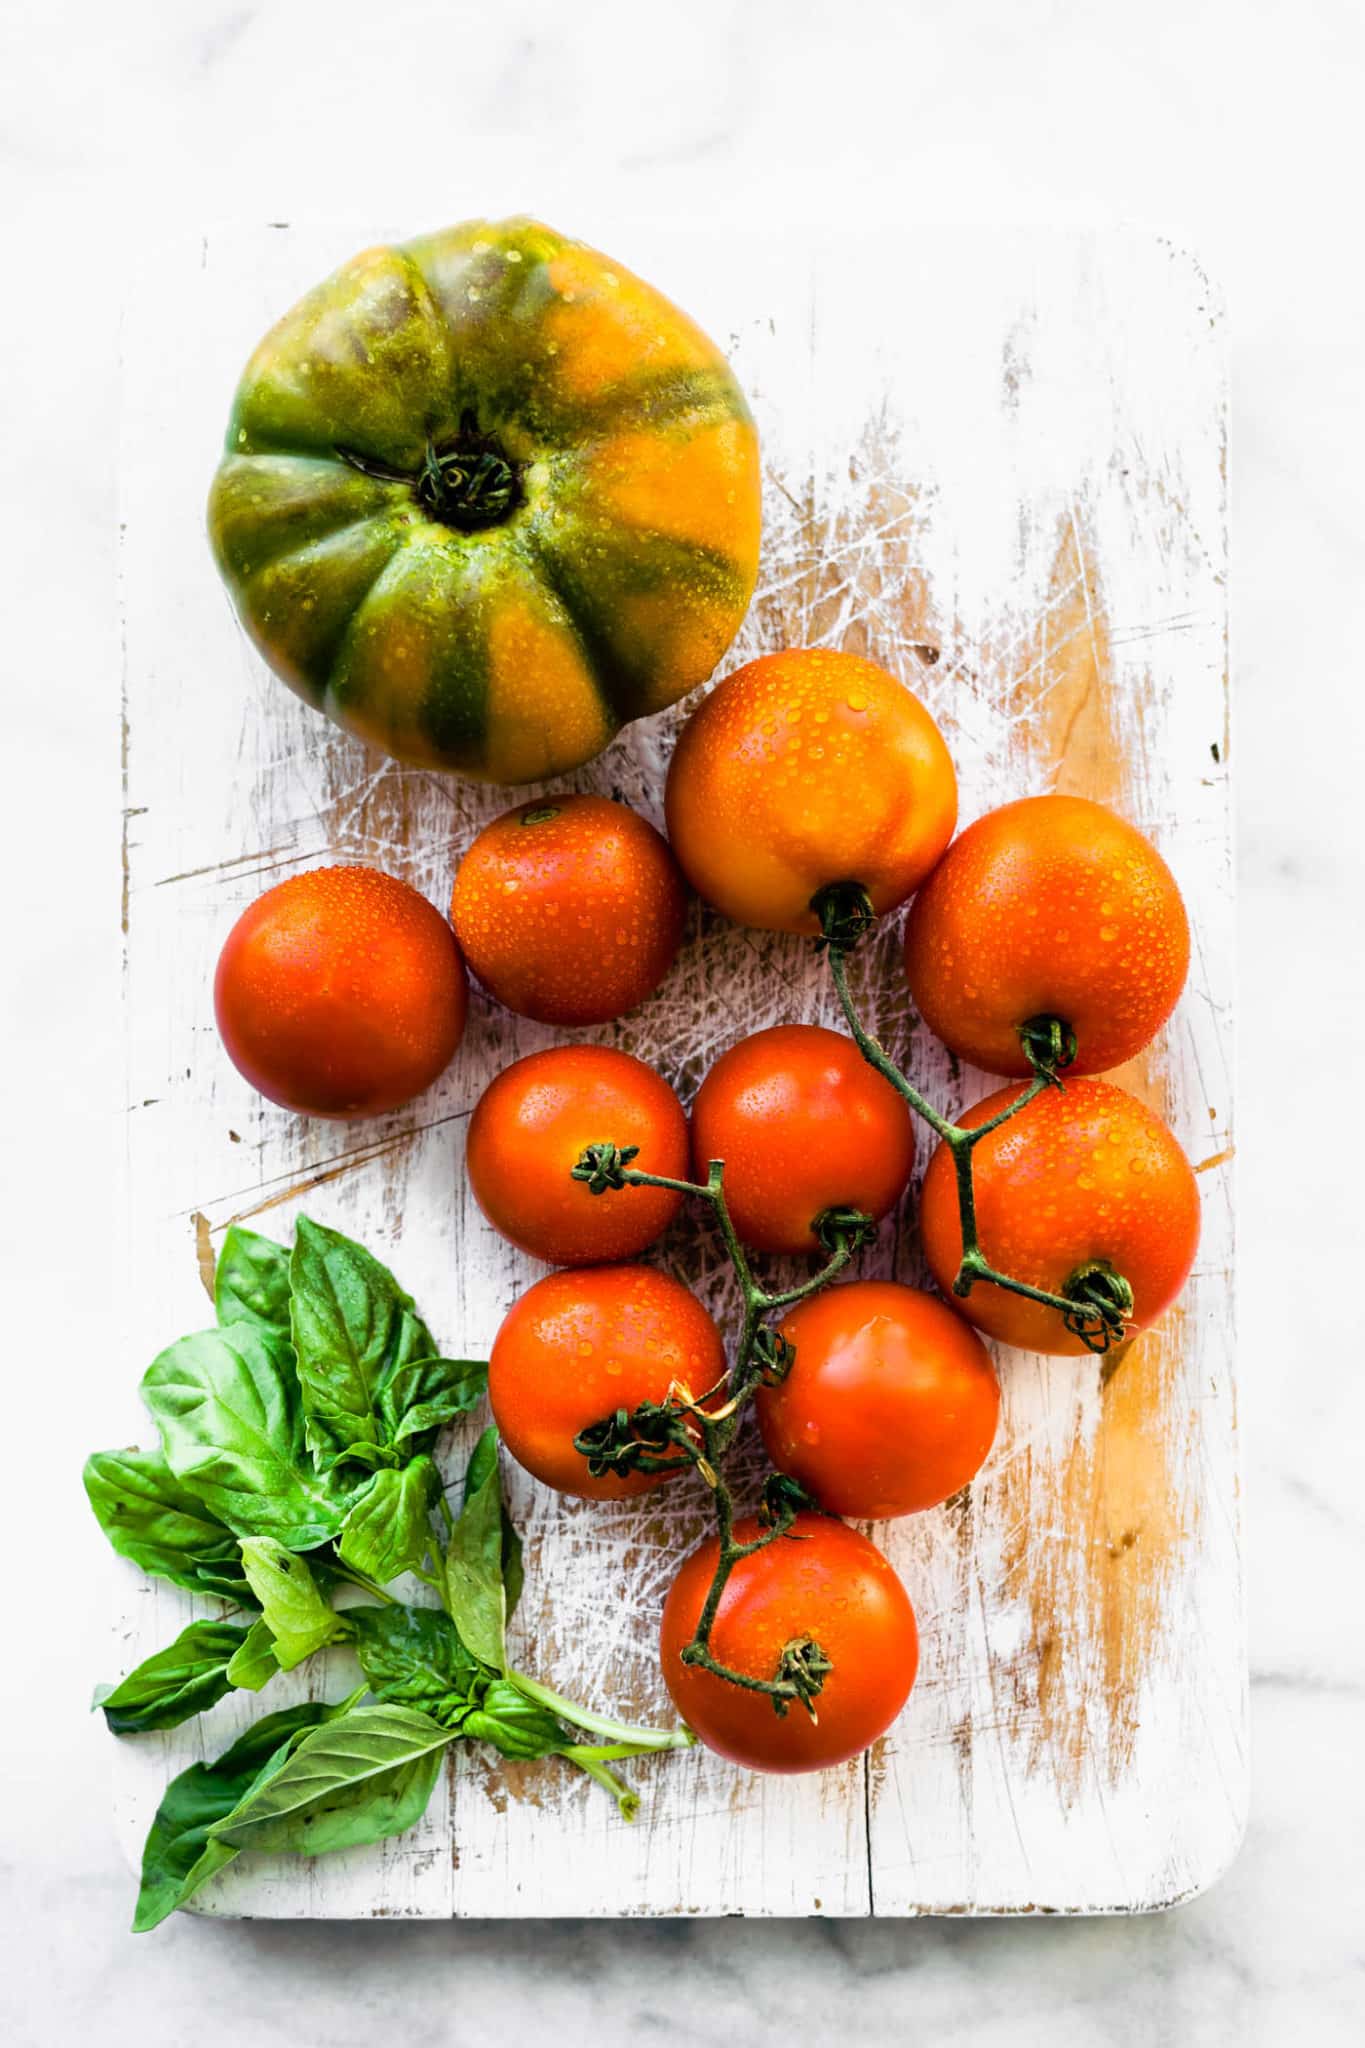 a cutting board with fresh herbs, on-the-vine tomatoes, and a large tomato.